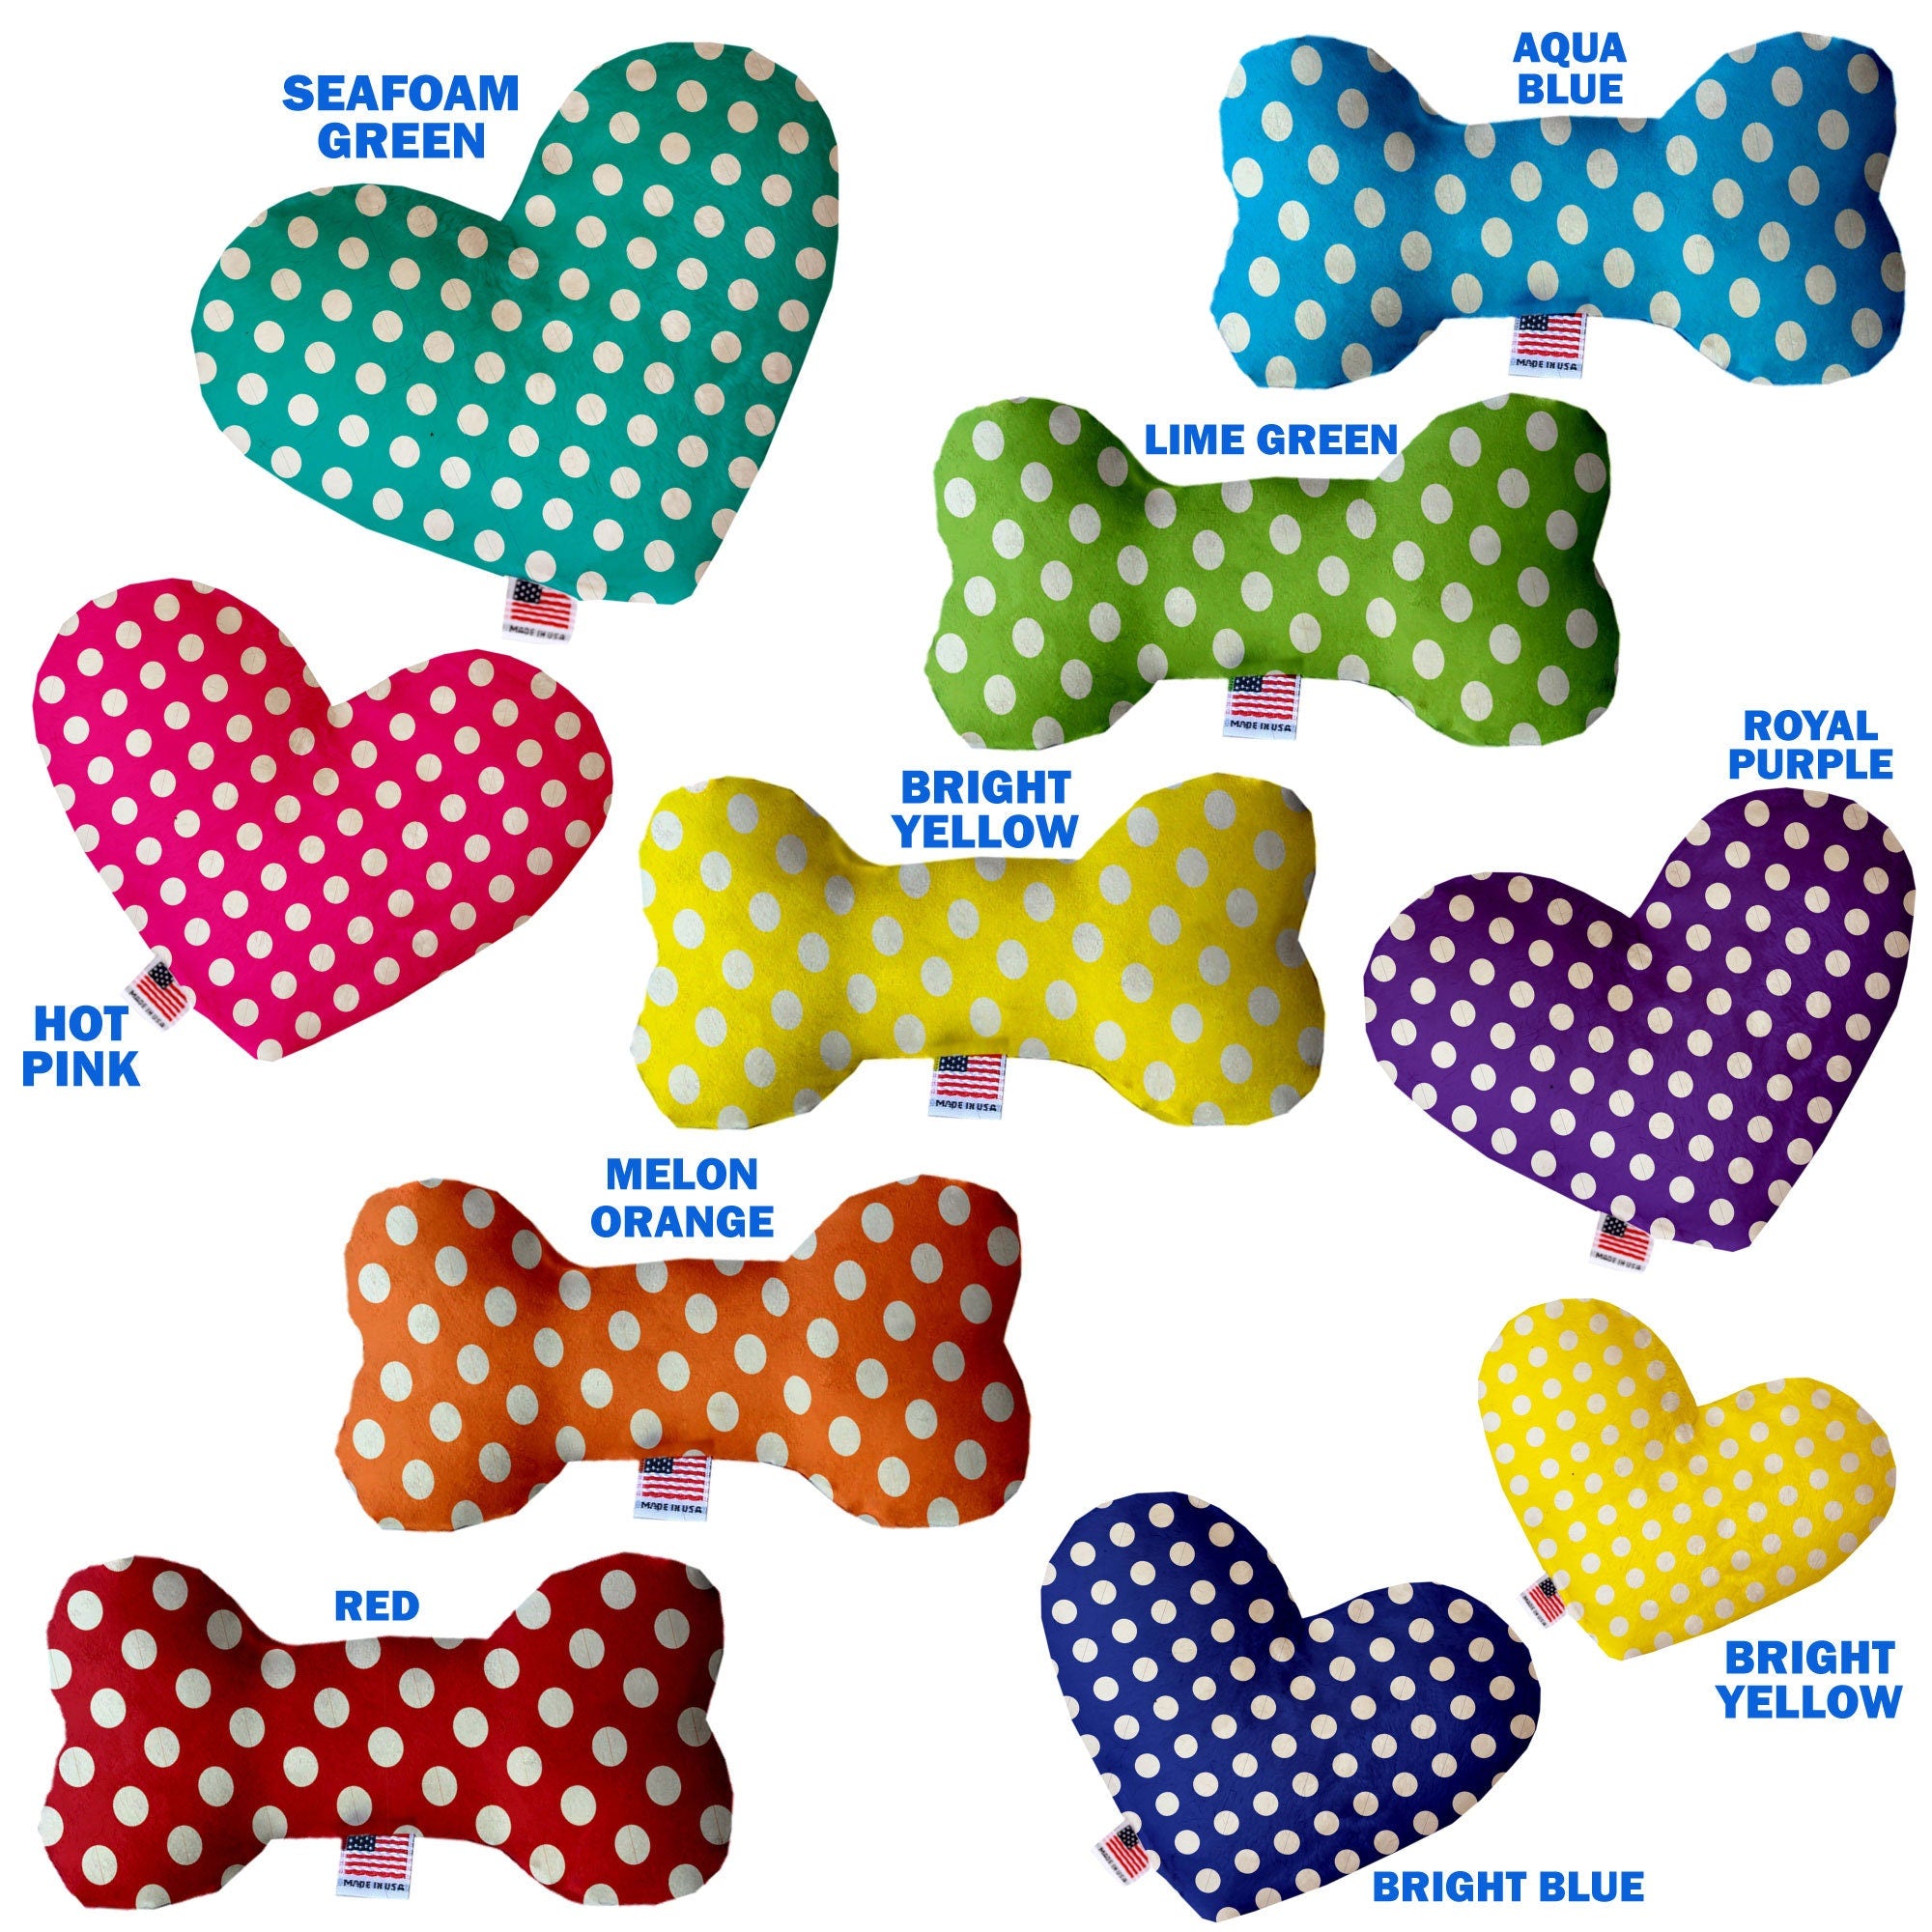 Pet and Dog Canvas or Plush Heart or Bone Toy, "Swiss Dots Group" (Available in different sizes, and 10 different pattern options!)